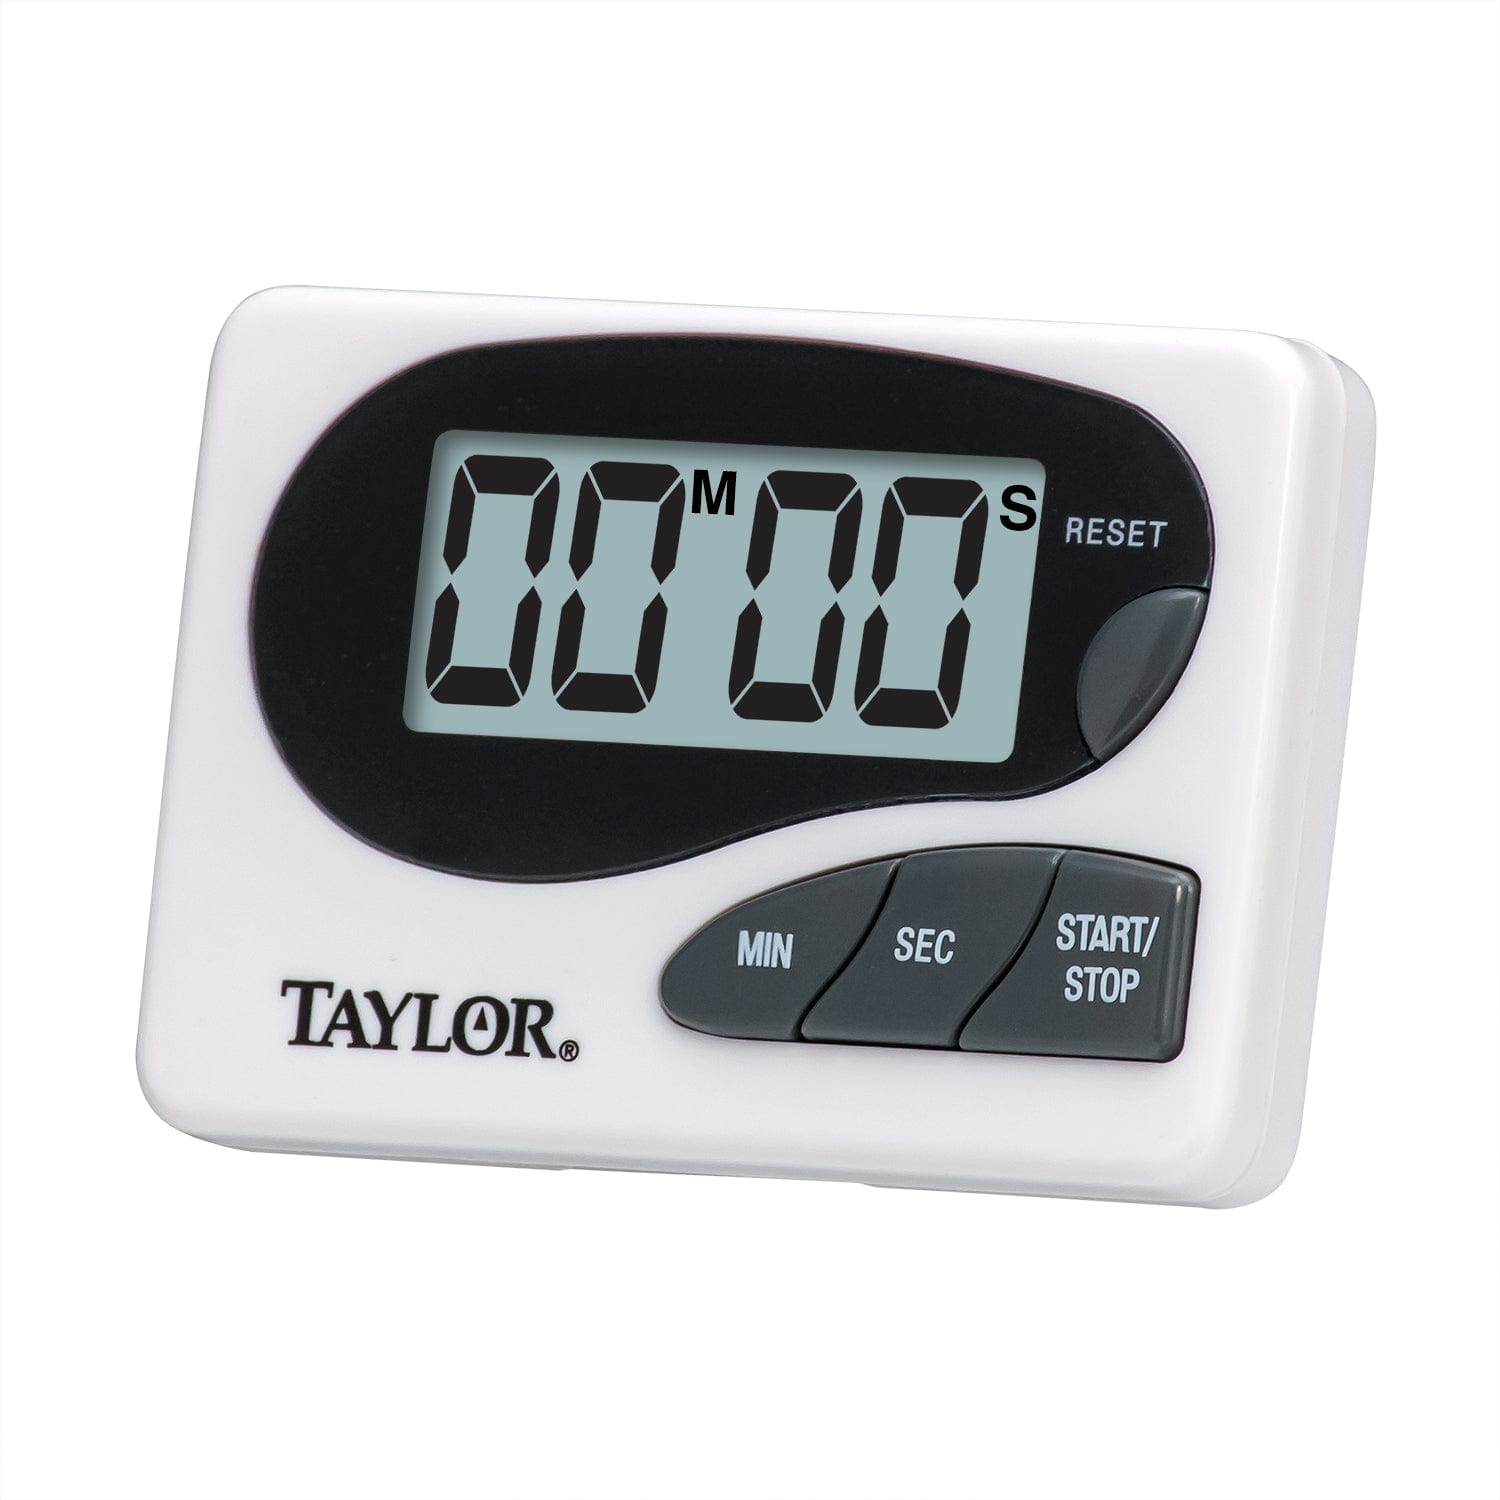  Taylor Kitchen Clip Timer with Magnet for Refrigerator